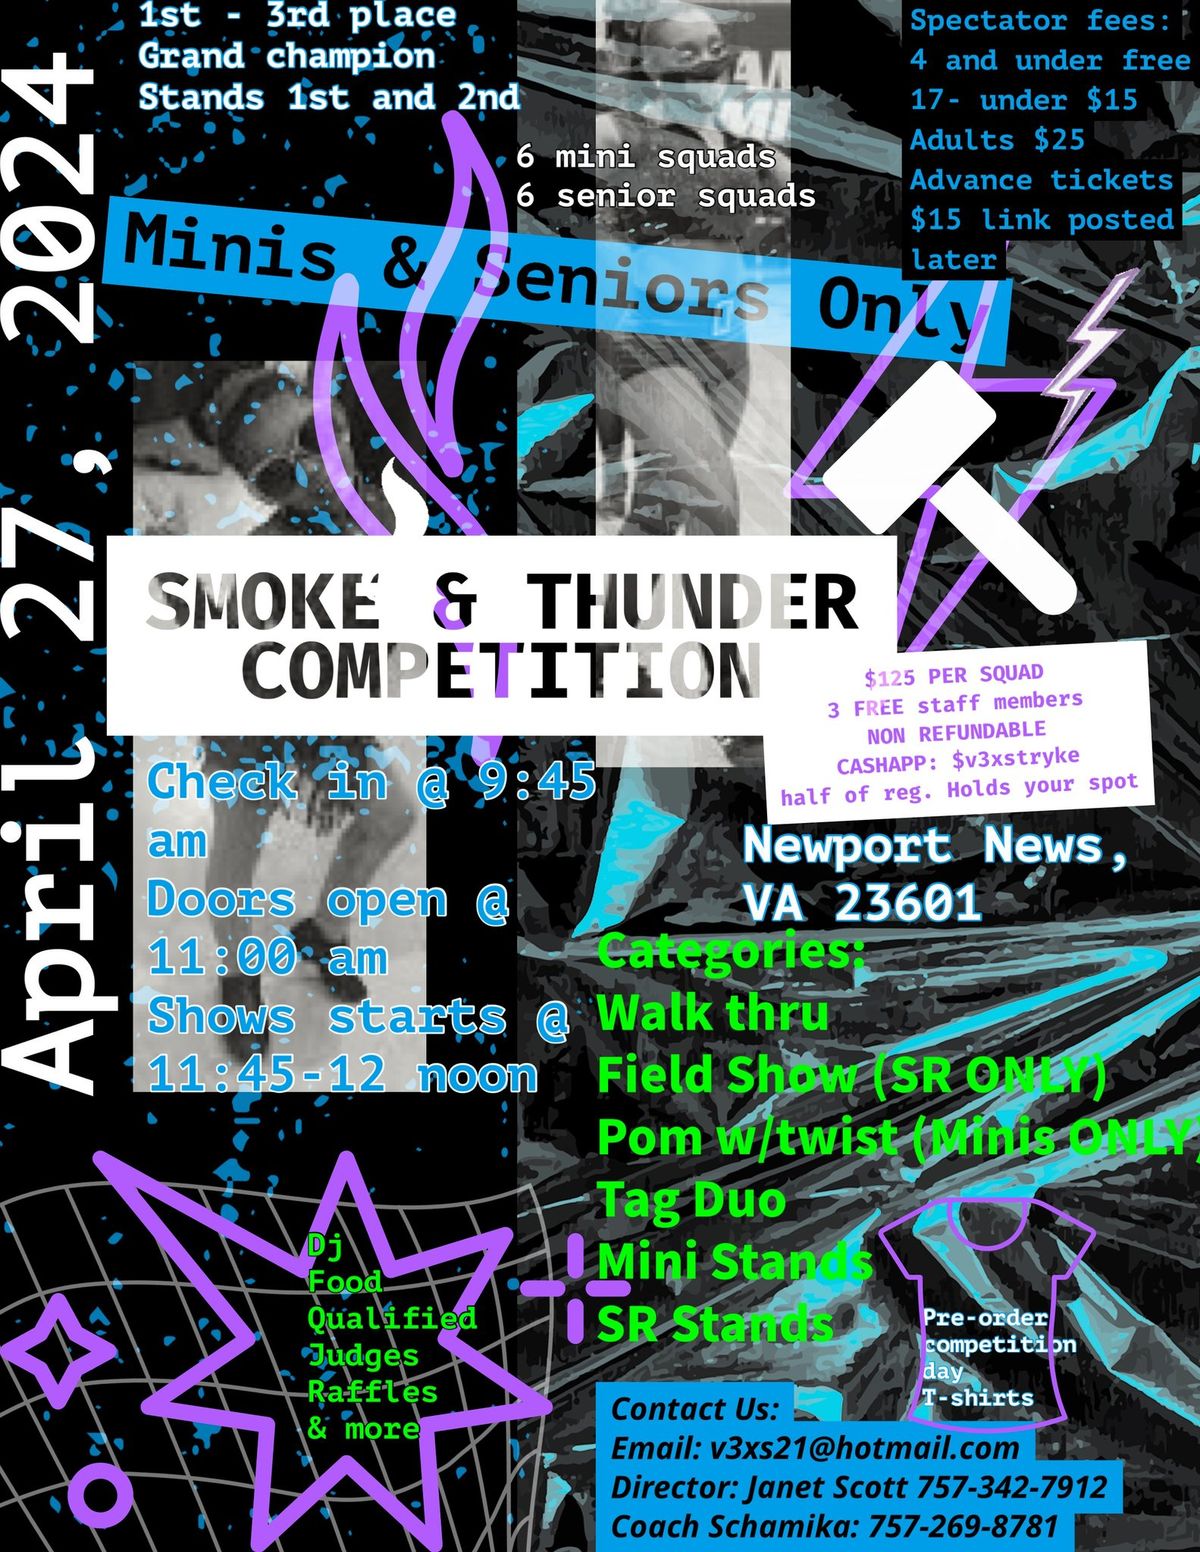 Smoke and Thunder Dance competition